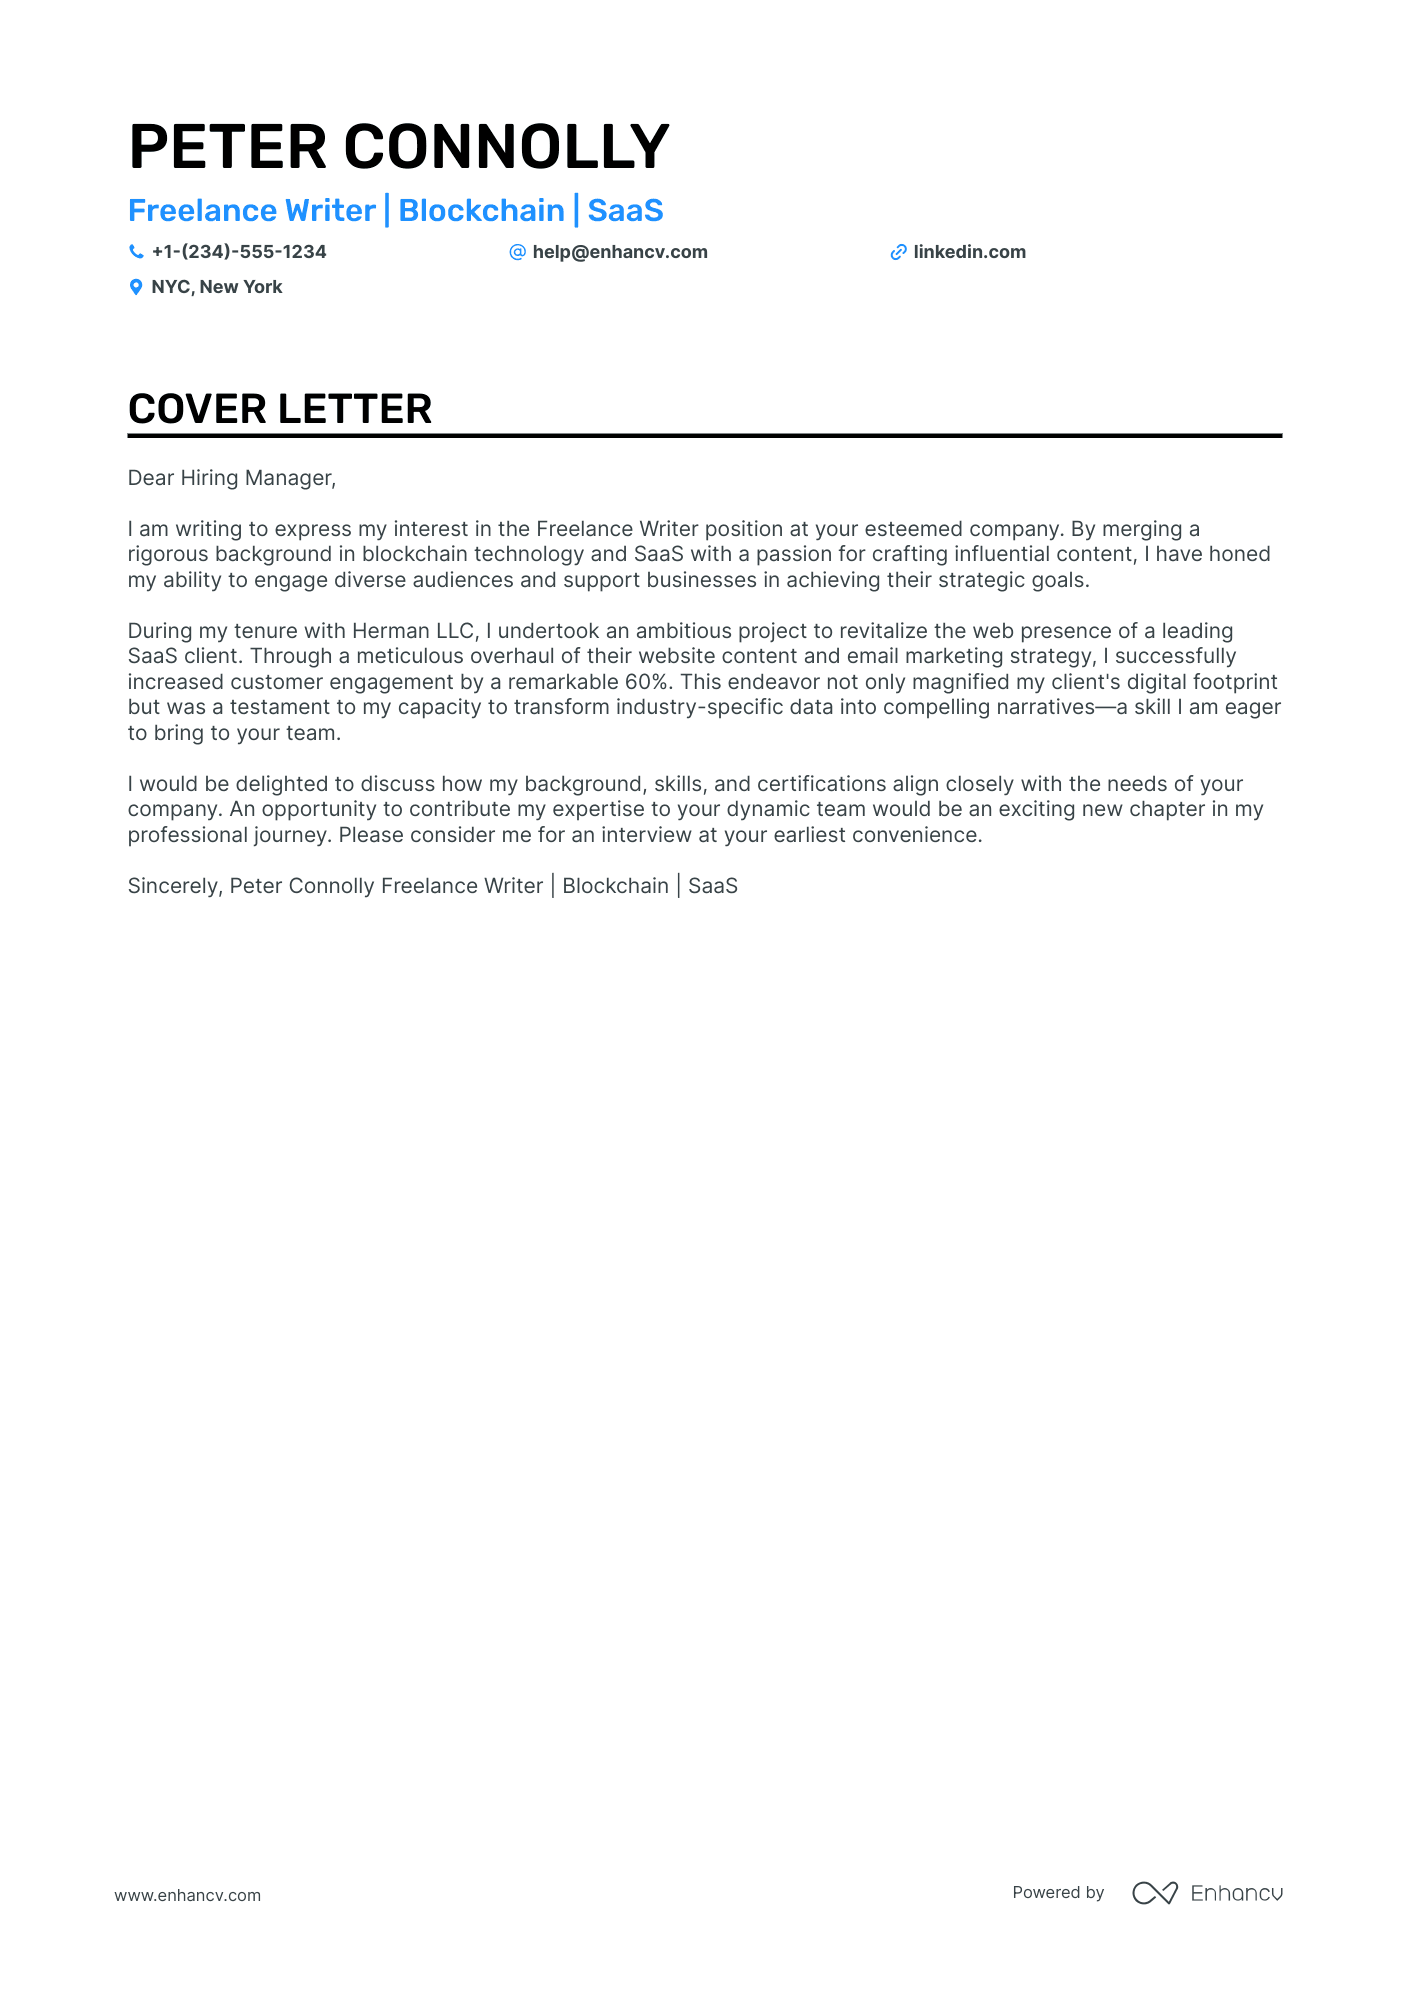 Content Writer cover letter